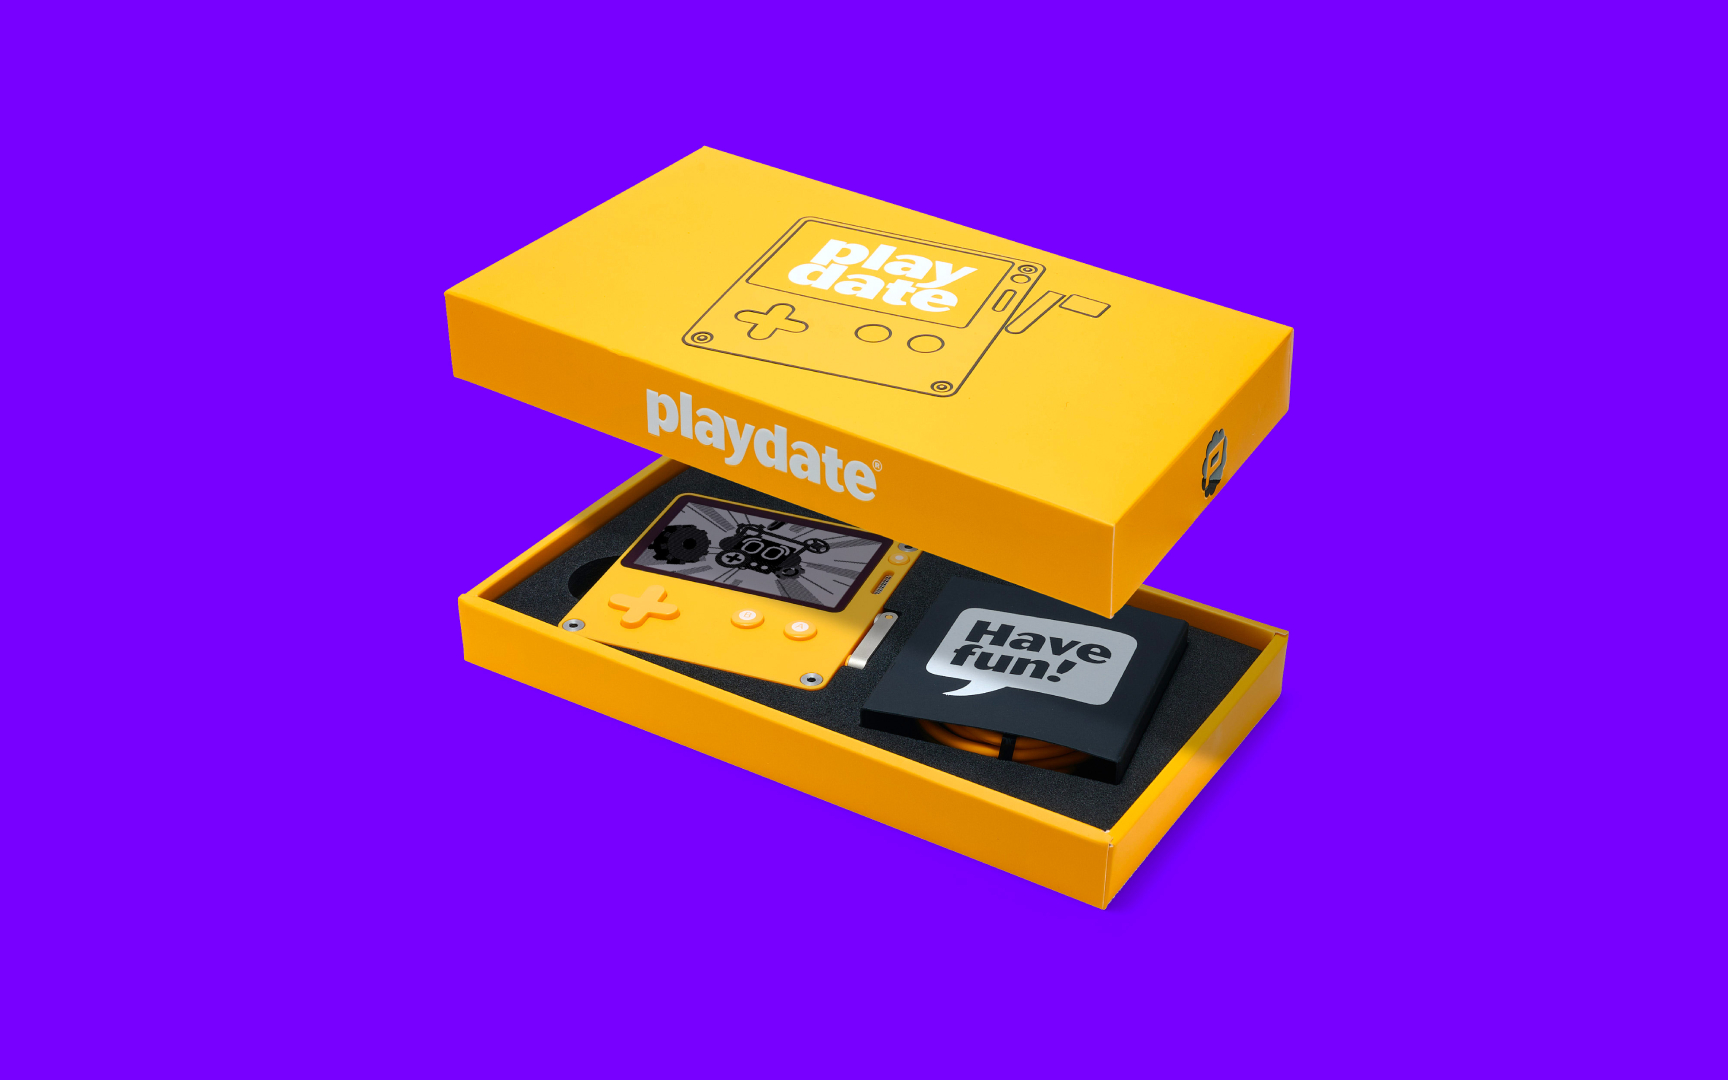 The Playdate console in its box